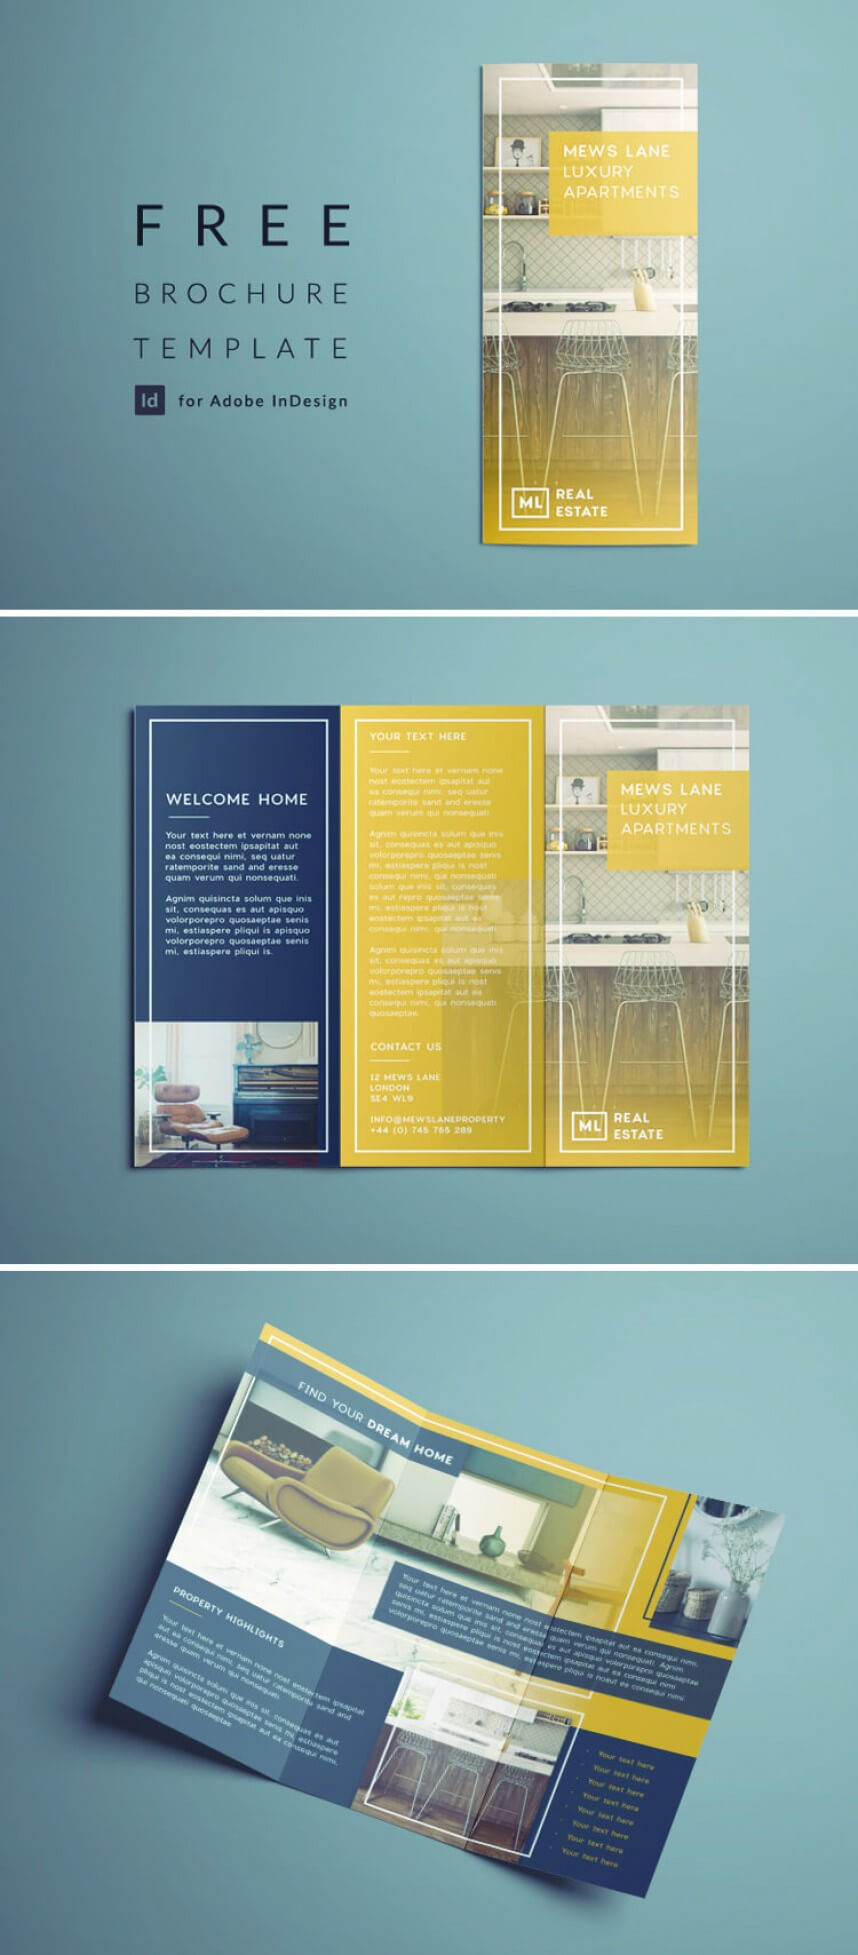 Staggering Indesign Brochure Templates Free Download Throughout Engineering Brochure Templates Free Download